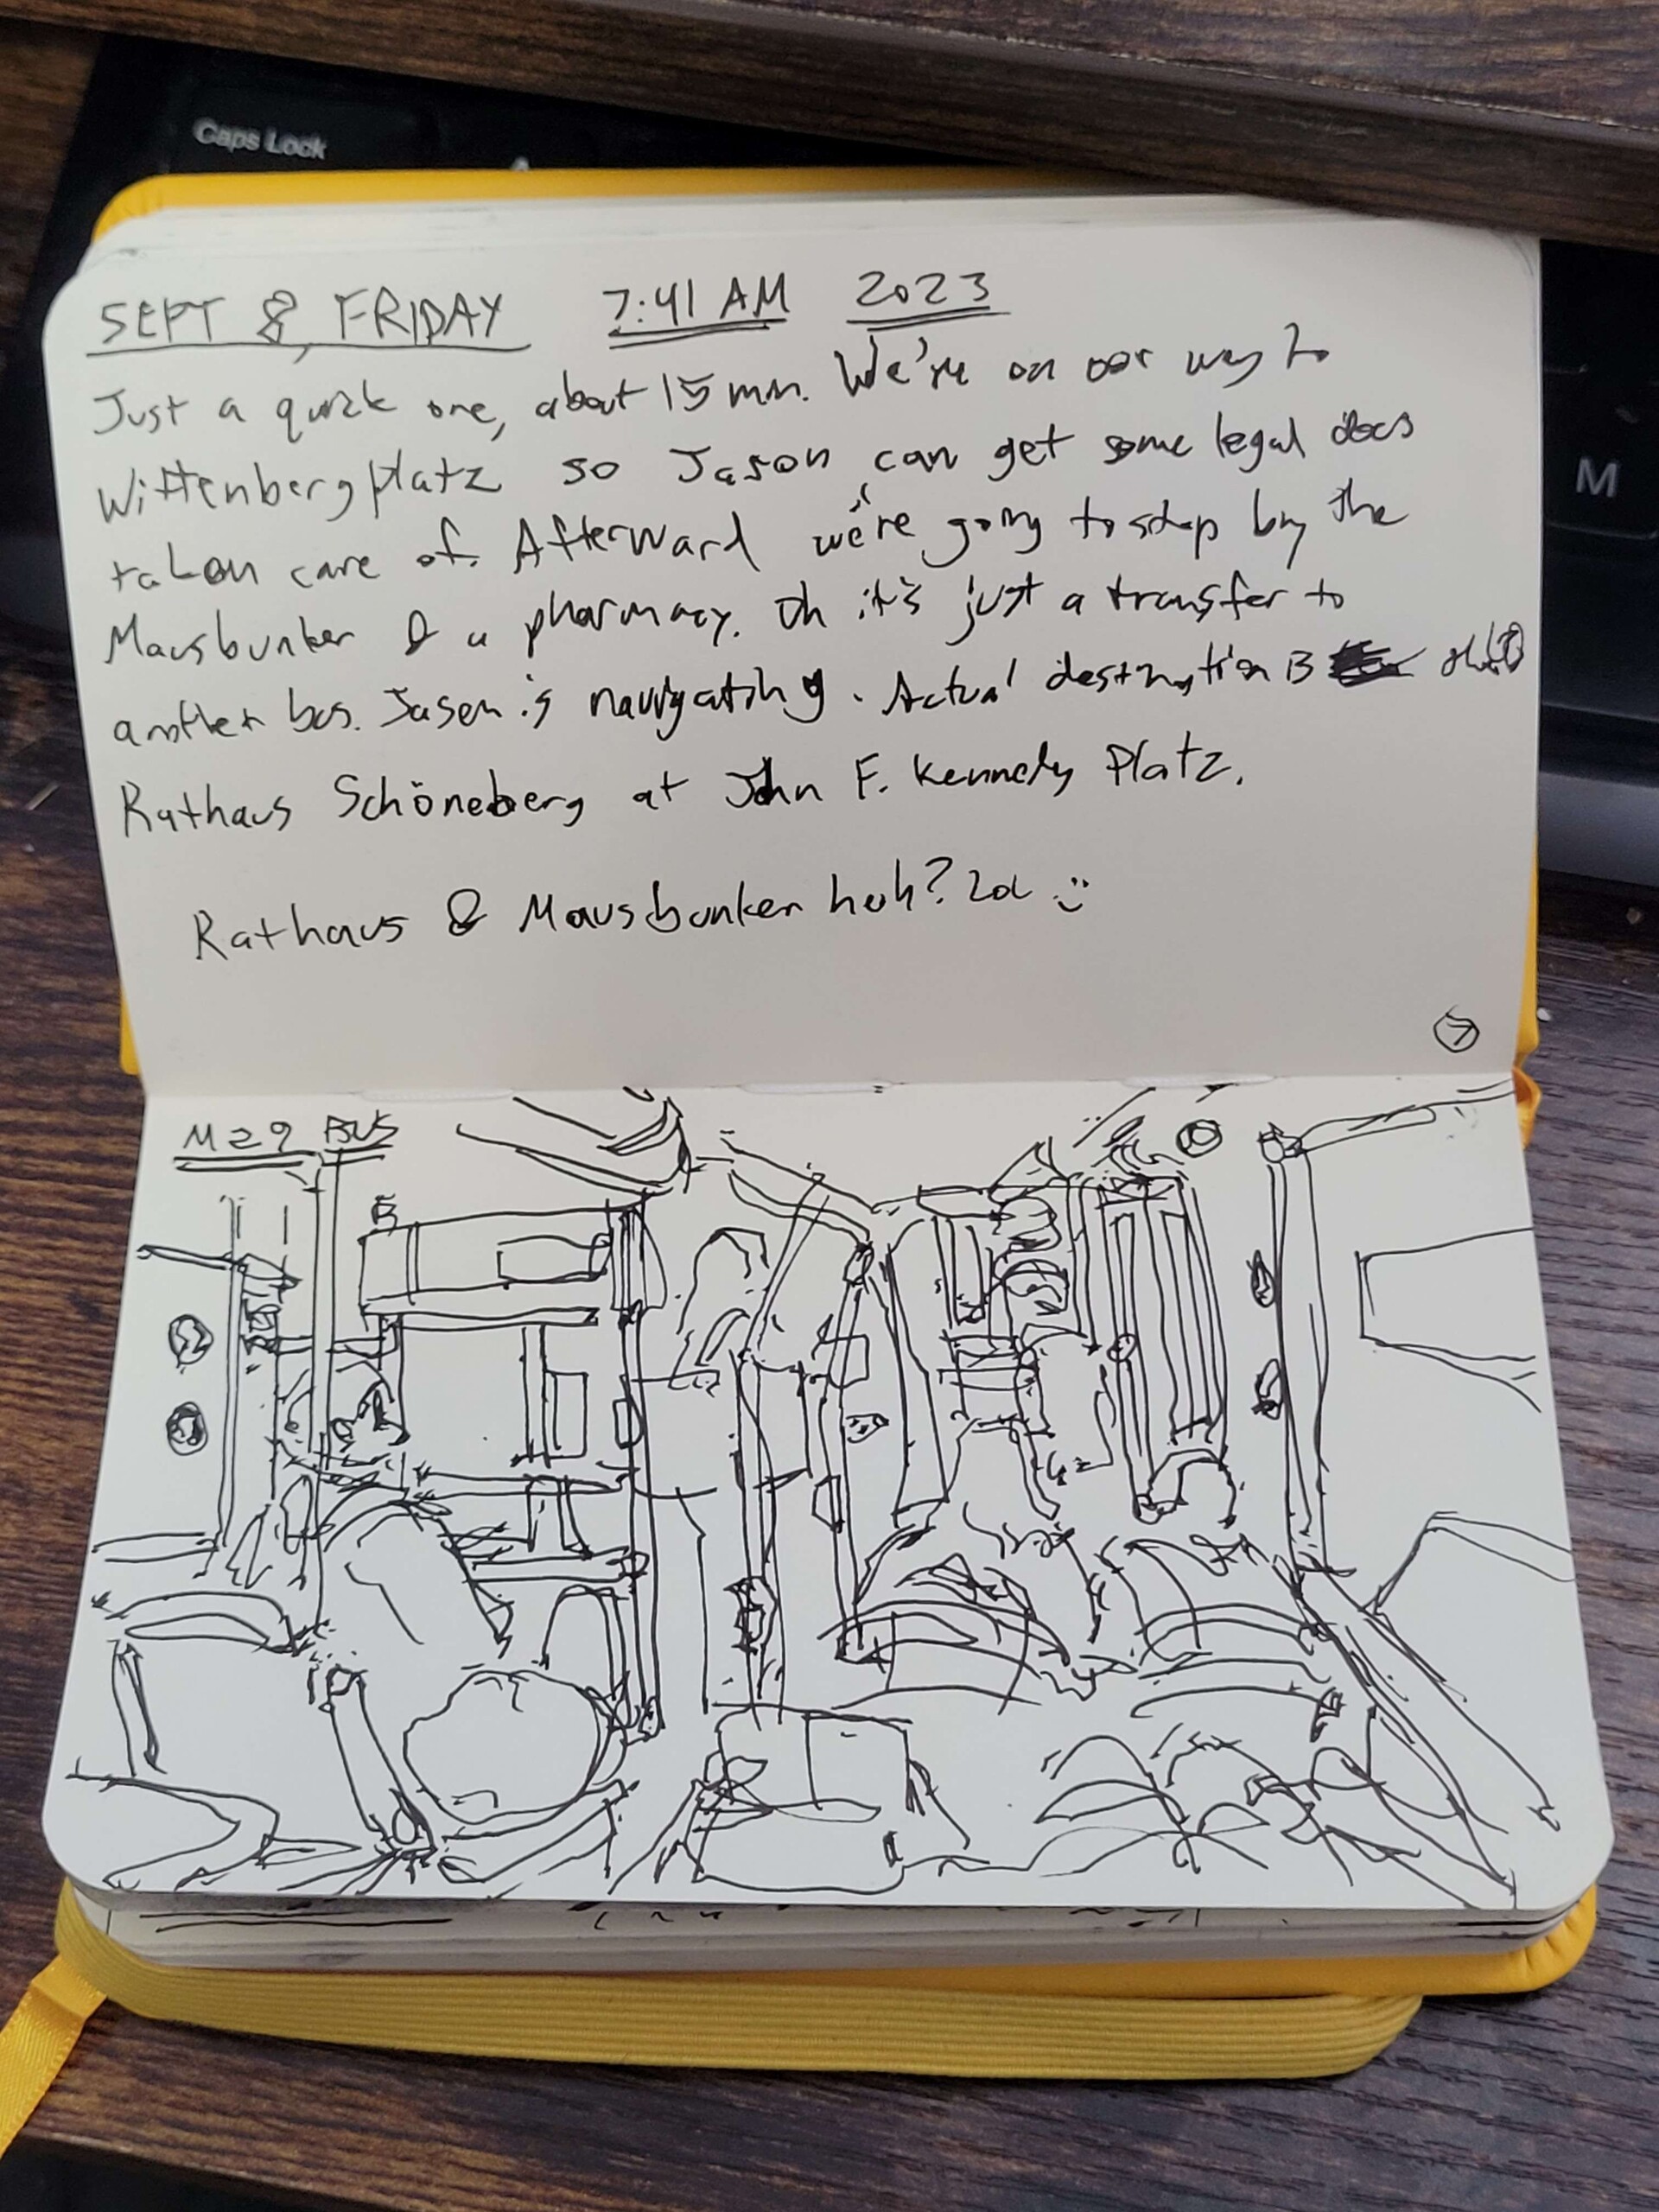 I started a travel sketch journal last year. It's really the only